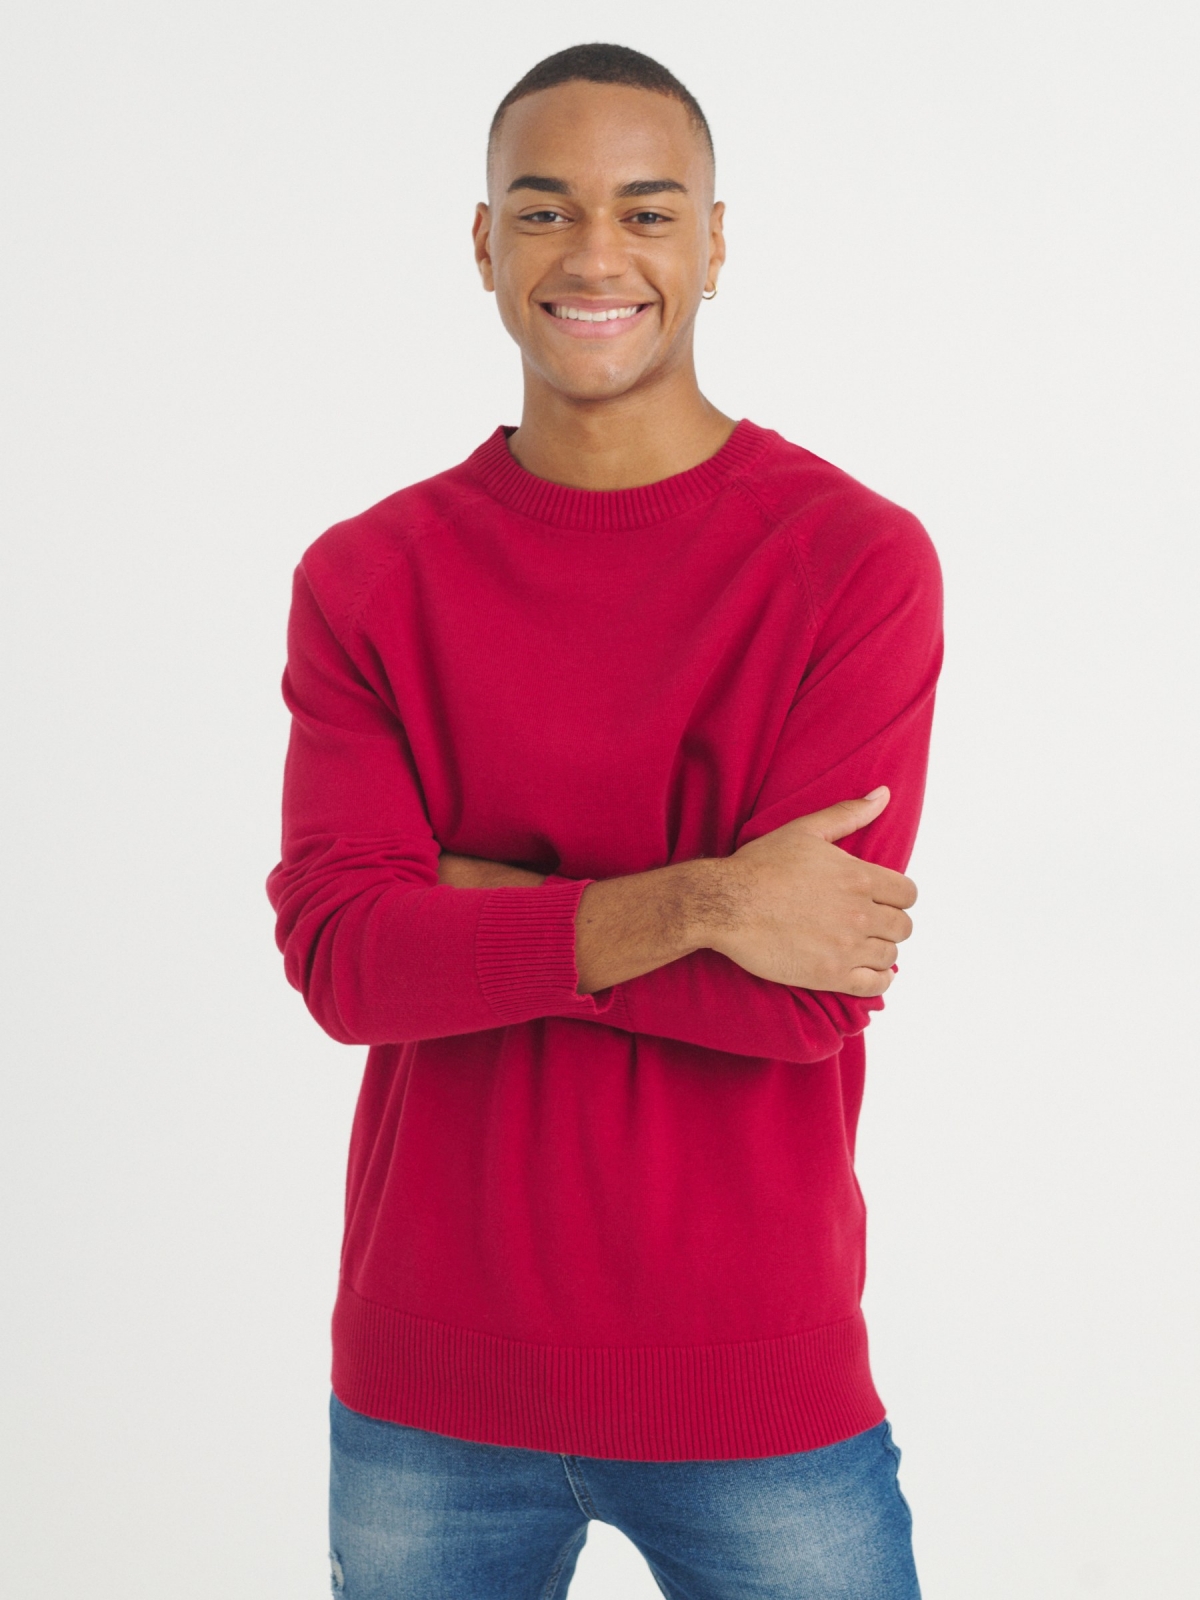 Plain sweater round neck red middle front view